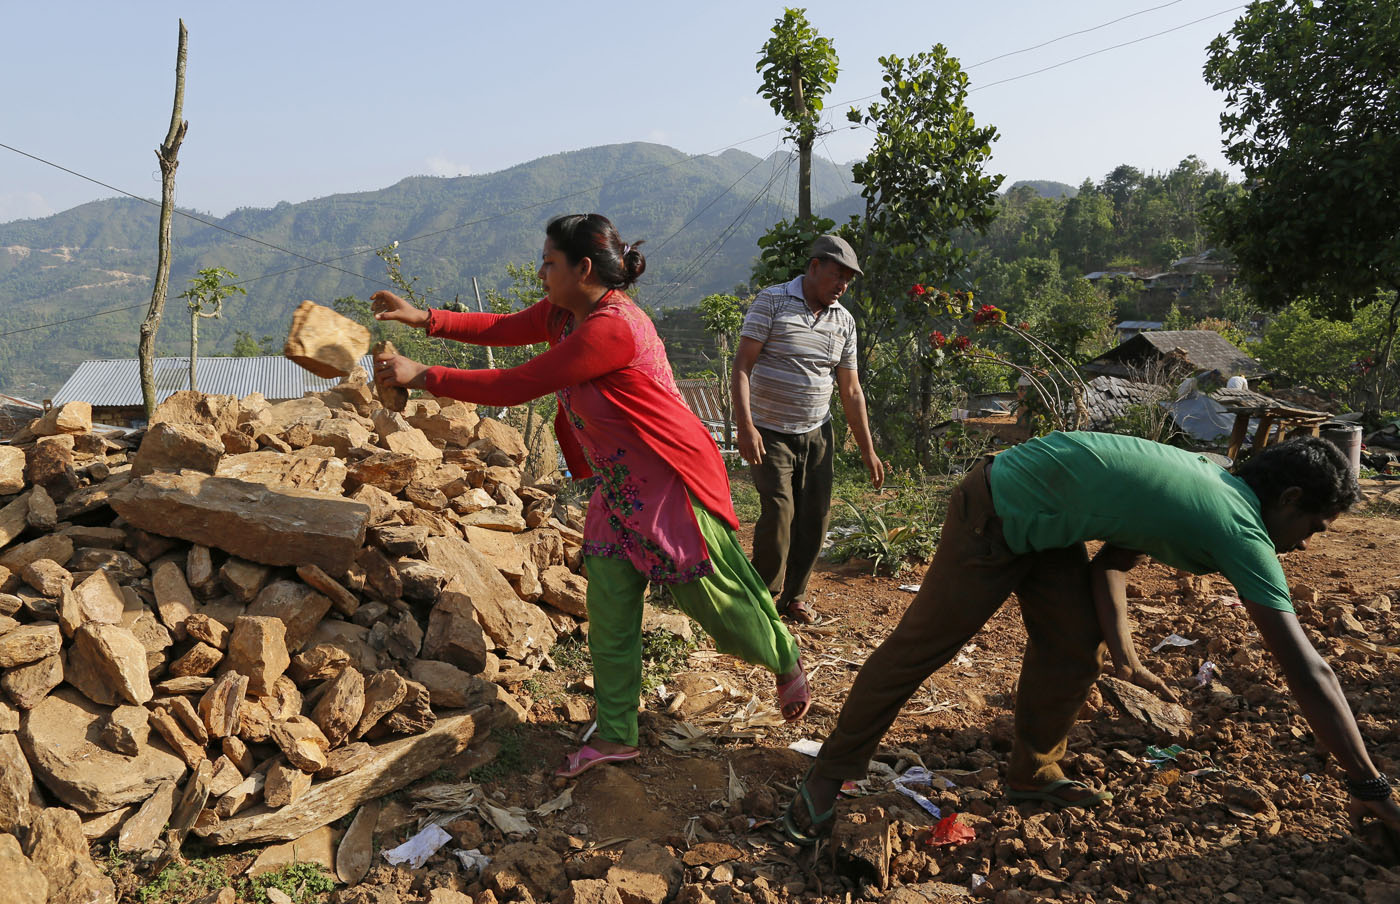 essay on earthquake in nepal 2015